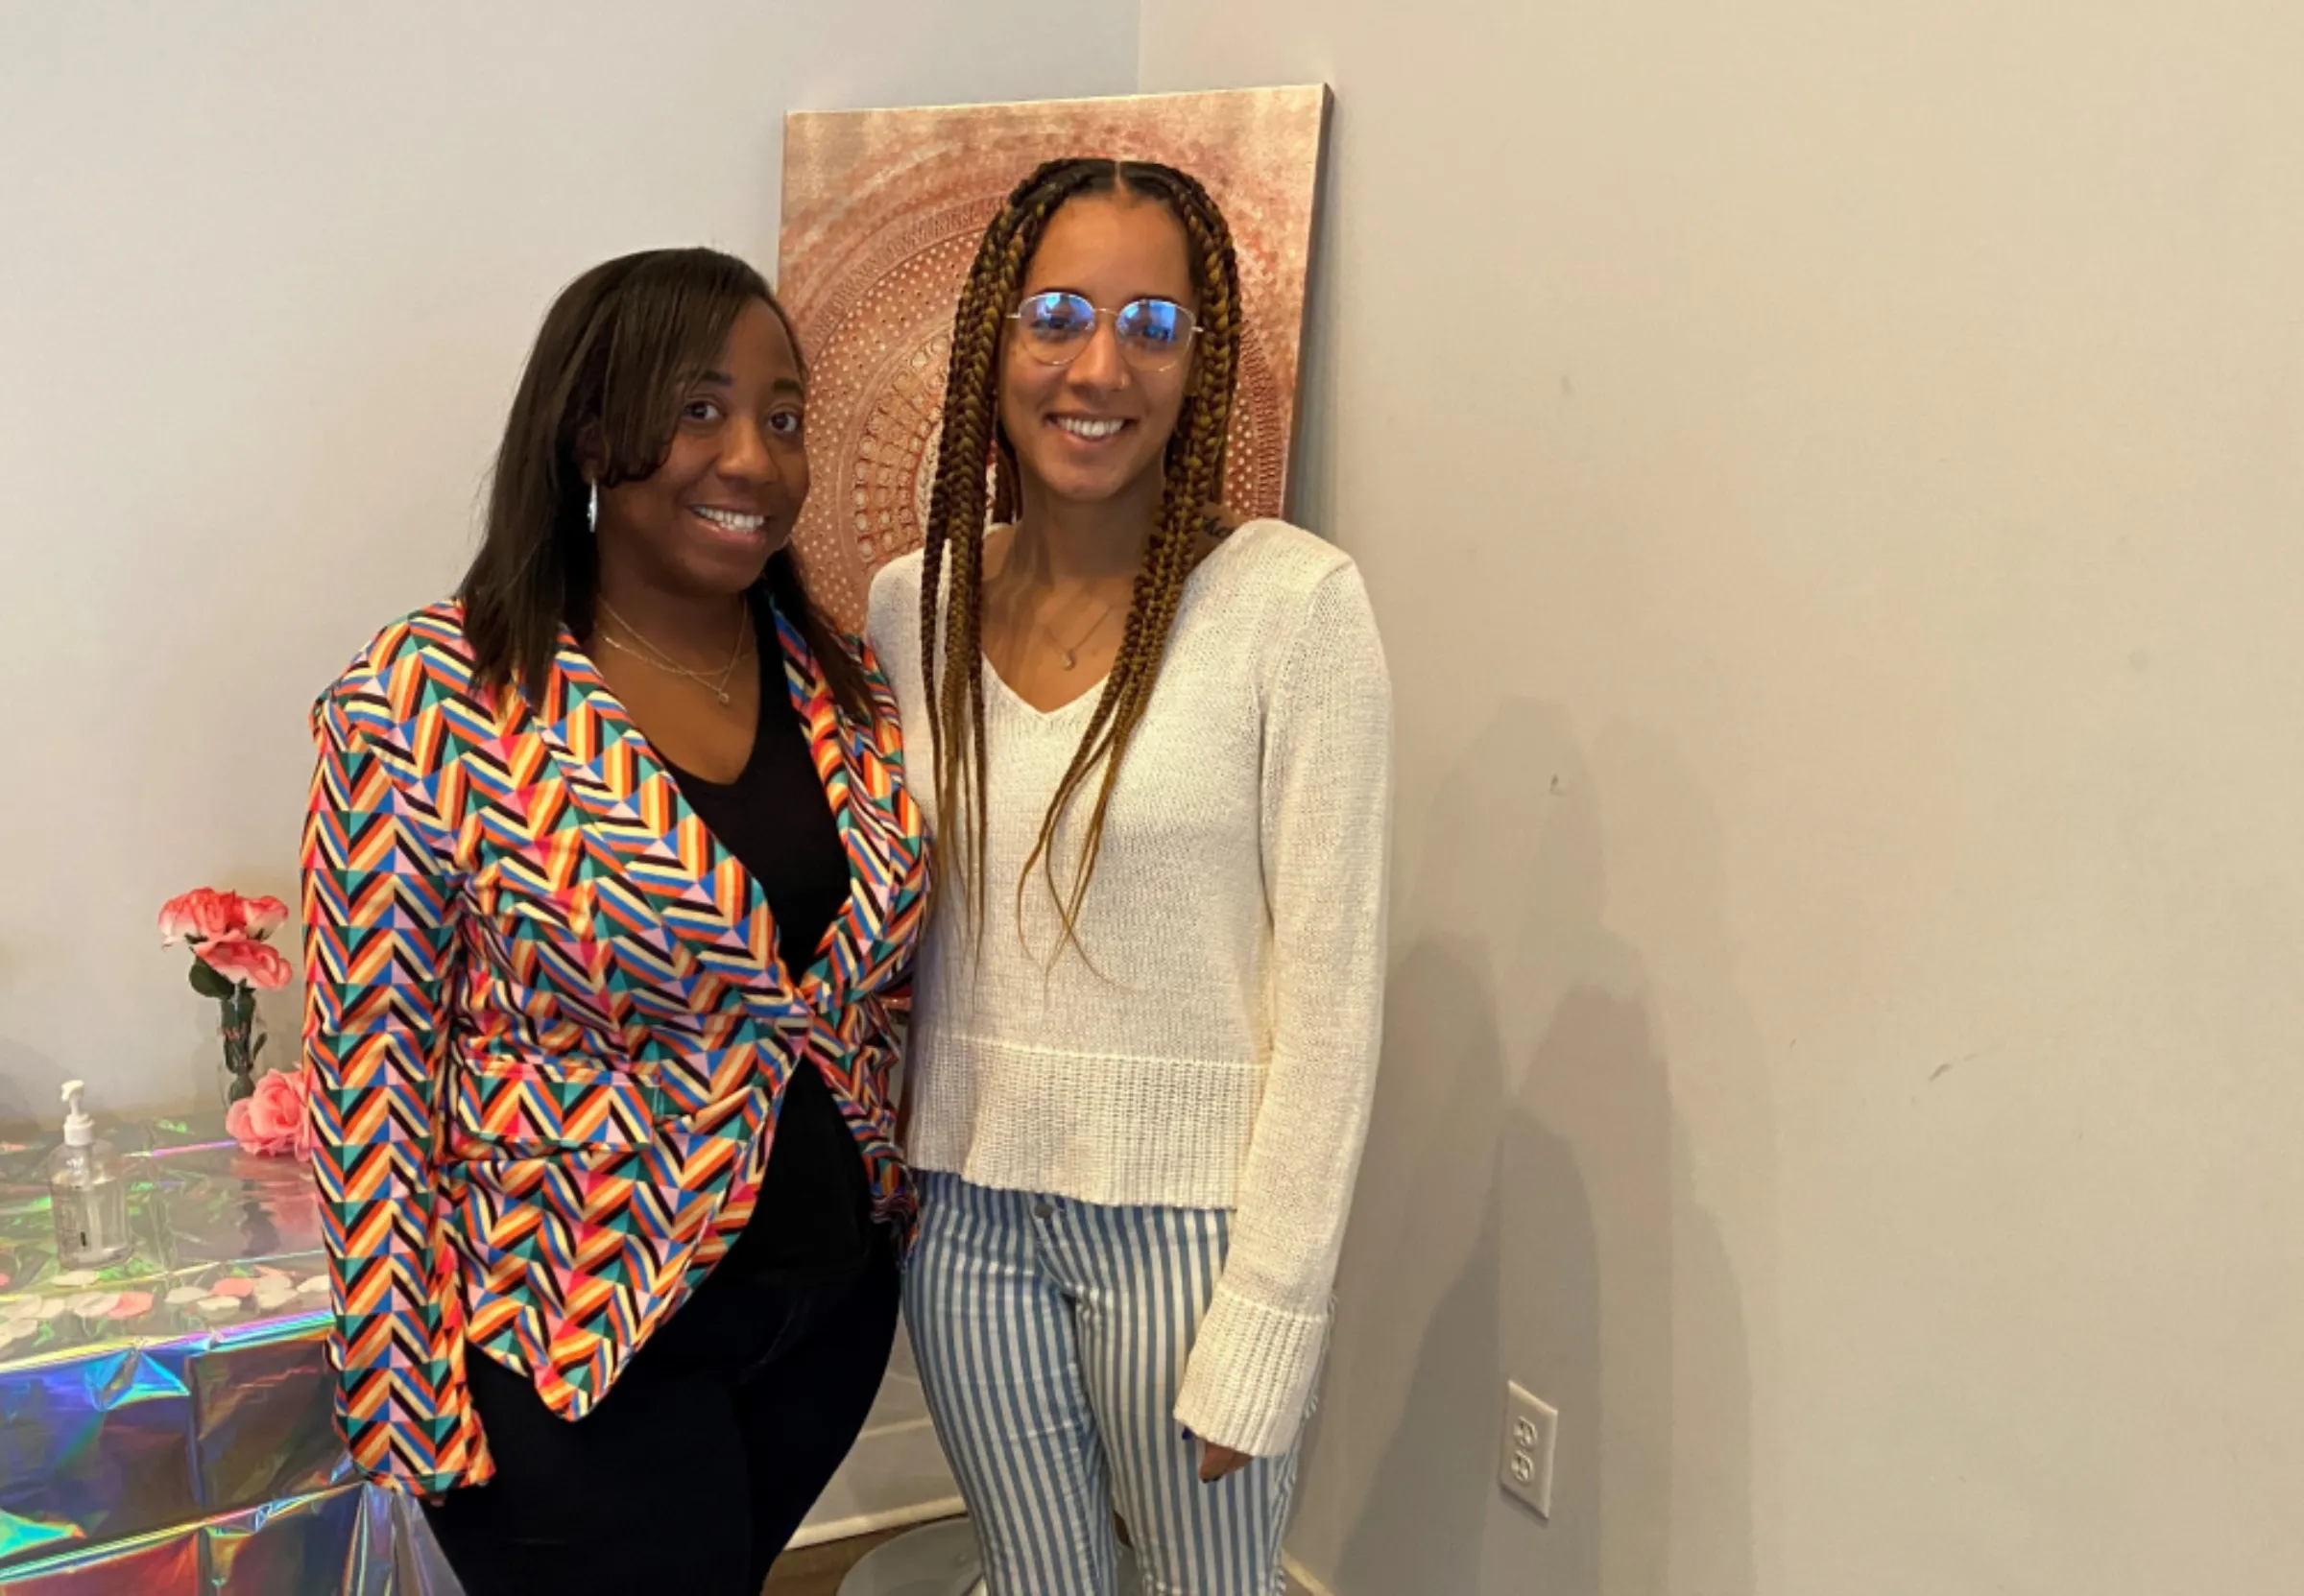 Kenda Sutton-EL, executive director of Birth in Color RVA (L), poses for a photo with Sequoi Phipps-Hawkins, the group’s director of communications and marketing (R), at the nonprofit organization’s office in Richmond, Virginia, U.S., February 27, 2023